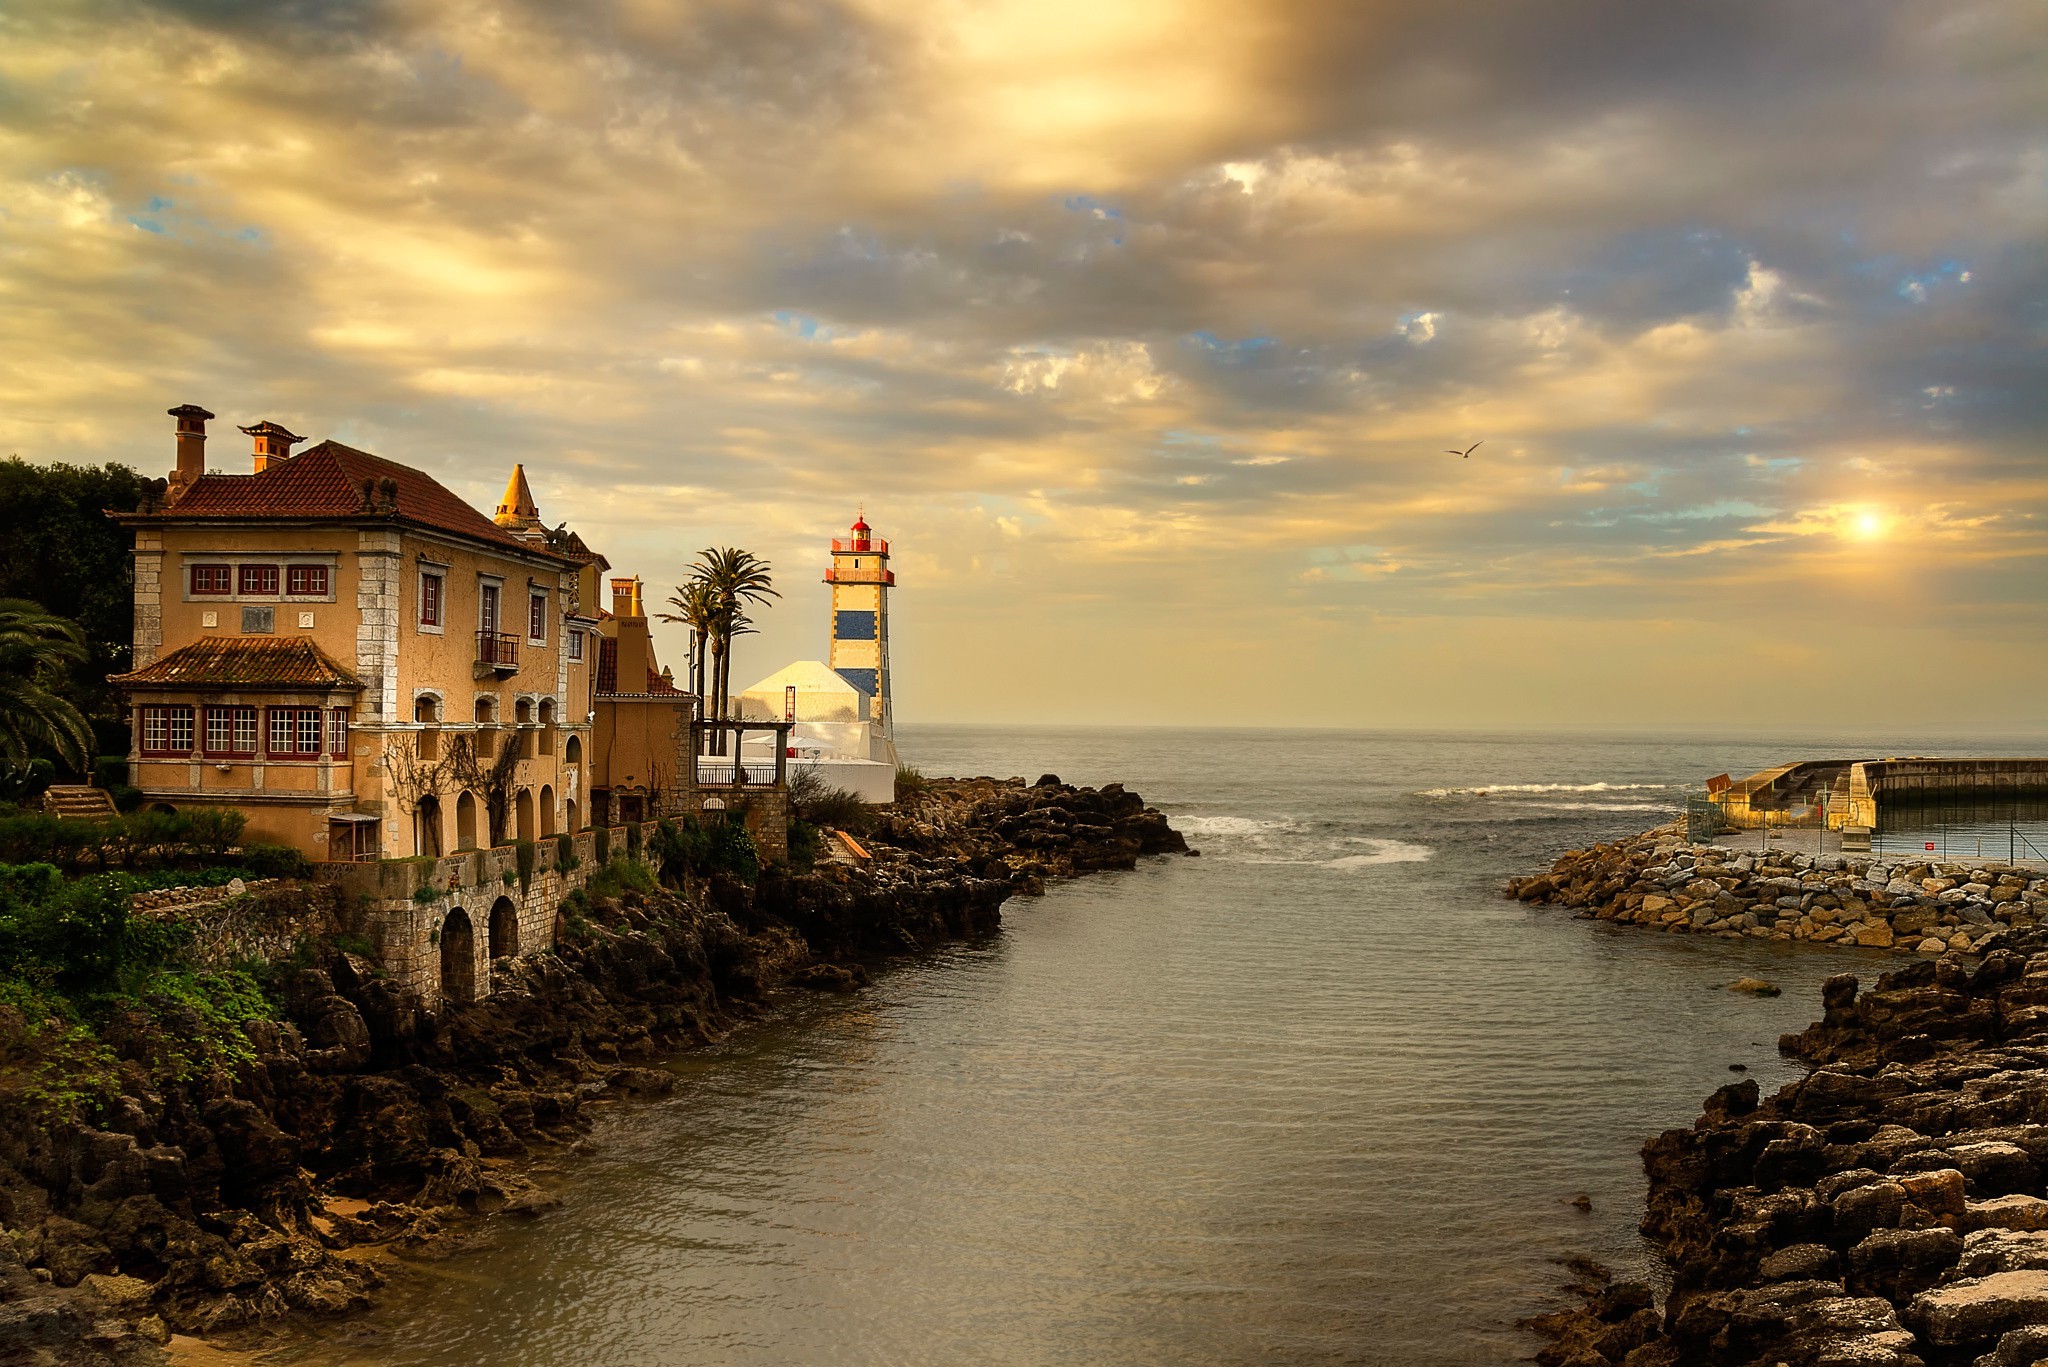 architecture, Old Building, Water, River, Sea, Portugal, Rock, Stones, Lighthouse, Palm Trees, Sun, Clouds, Birds Wallpaper